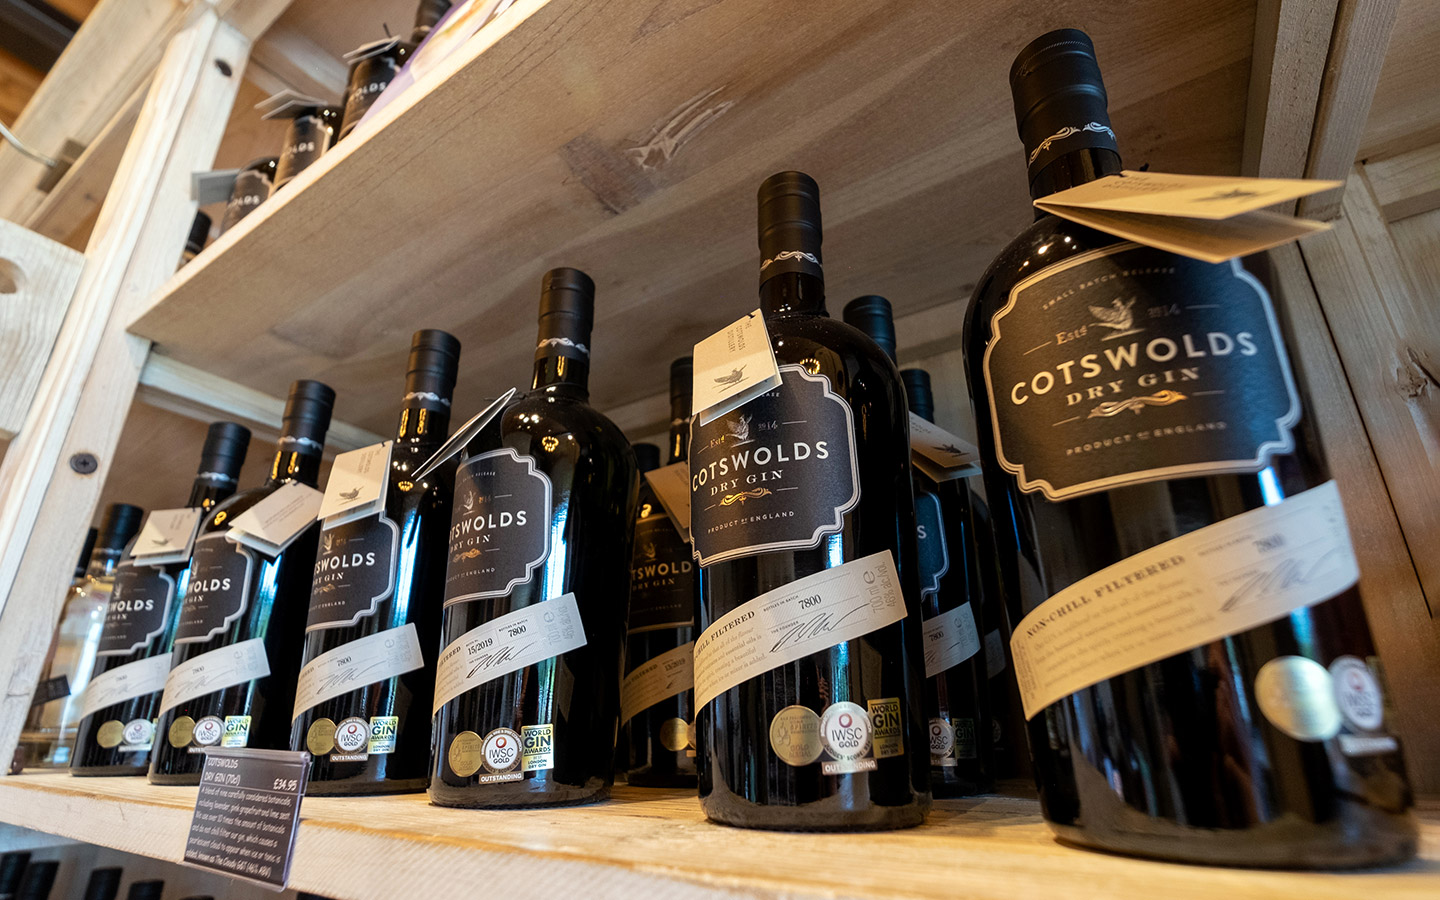 Cotswolds Dry Gin from the Cotswolds Distillery